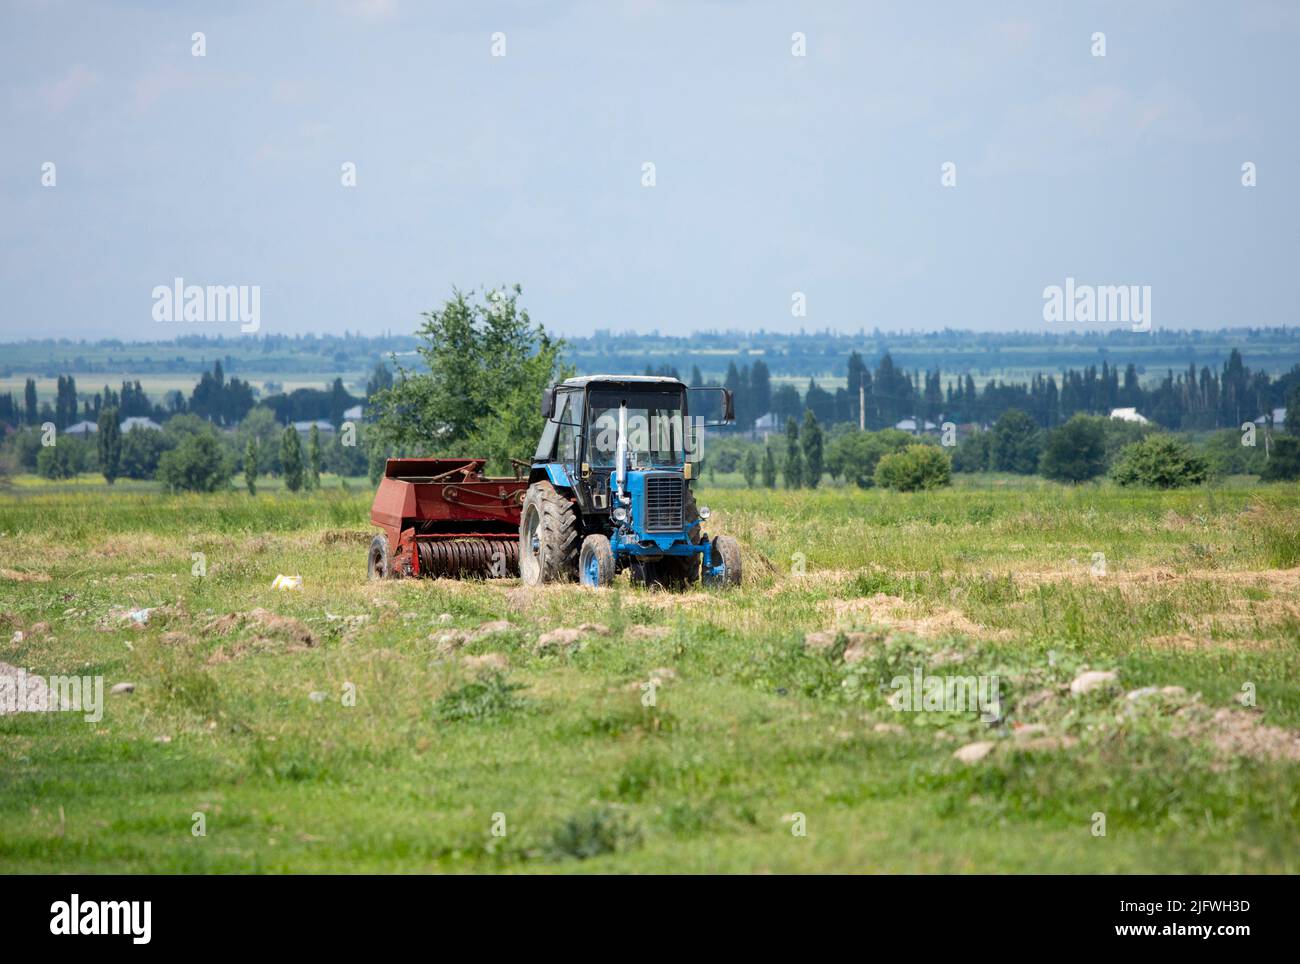 An old soviet tractor working in a field in Kyrgyzstan. Stock Photo